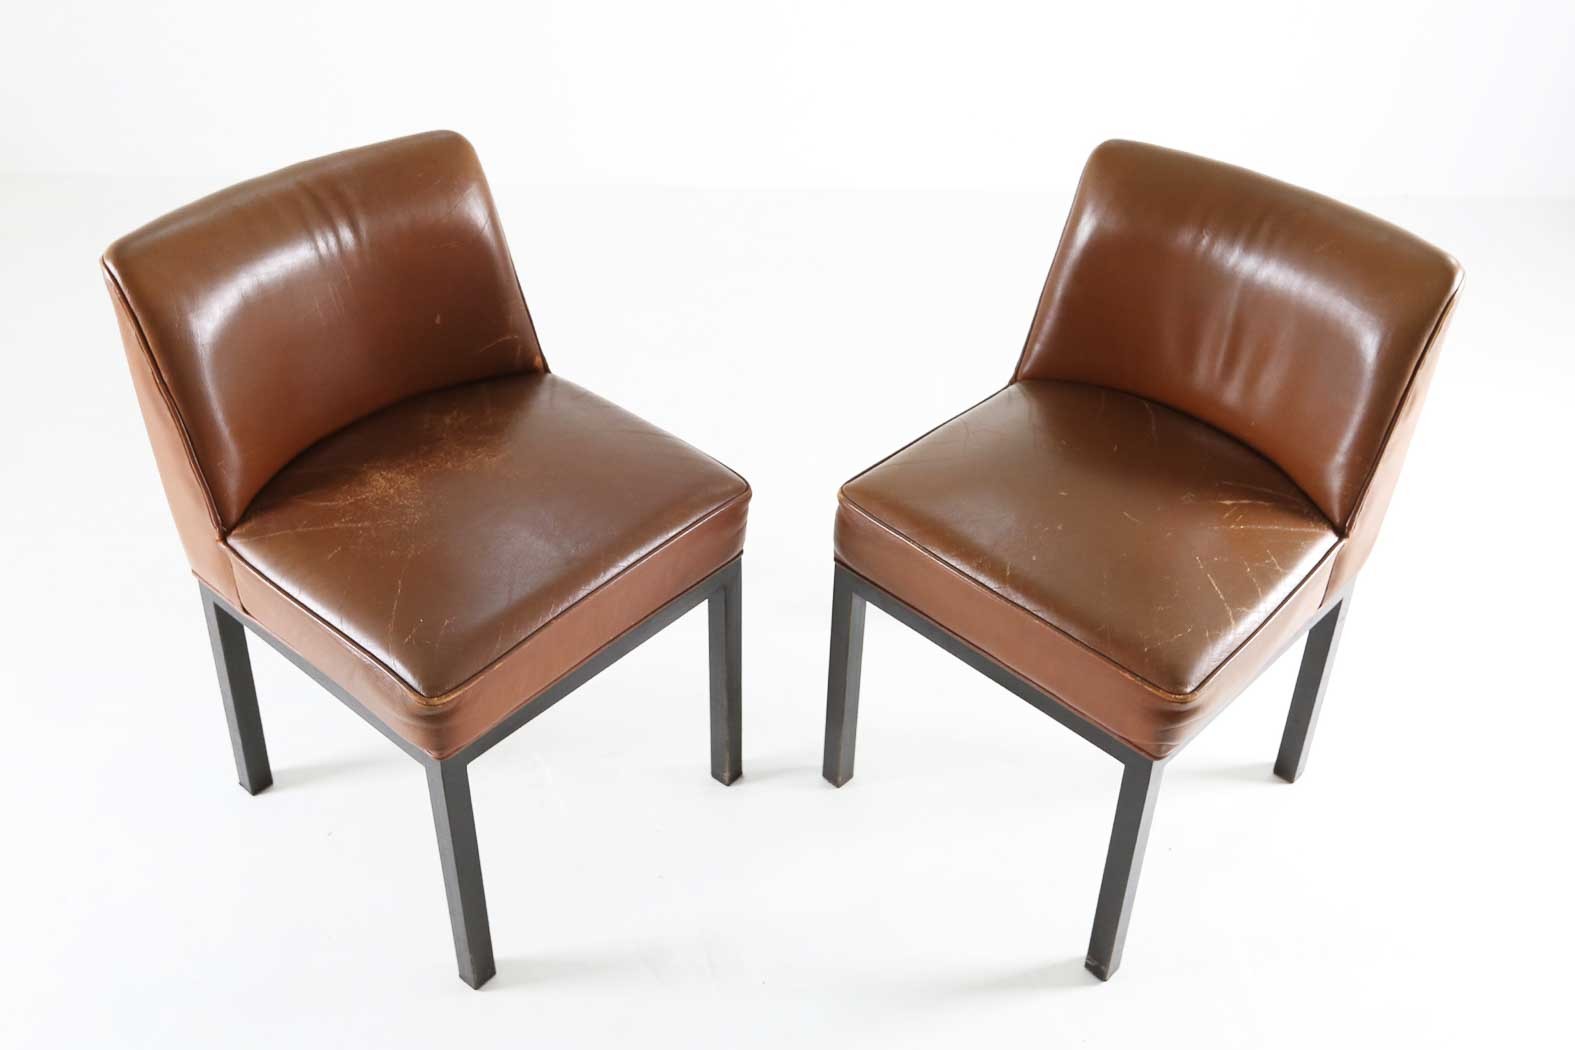 Louise chairs by Jules Wabbes